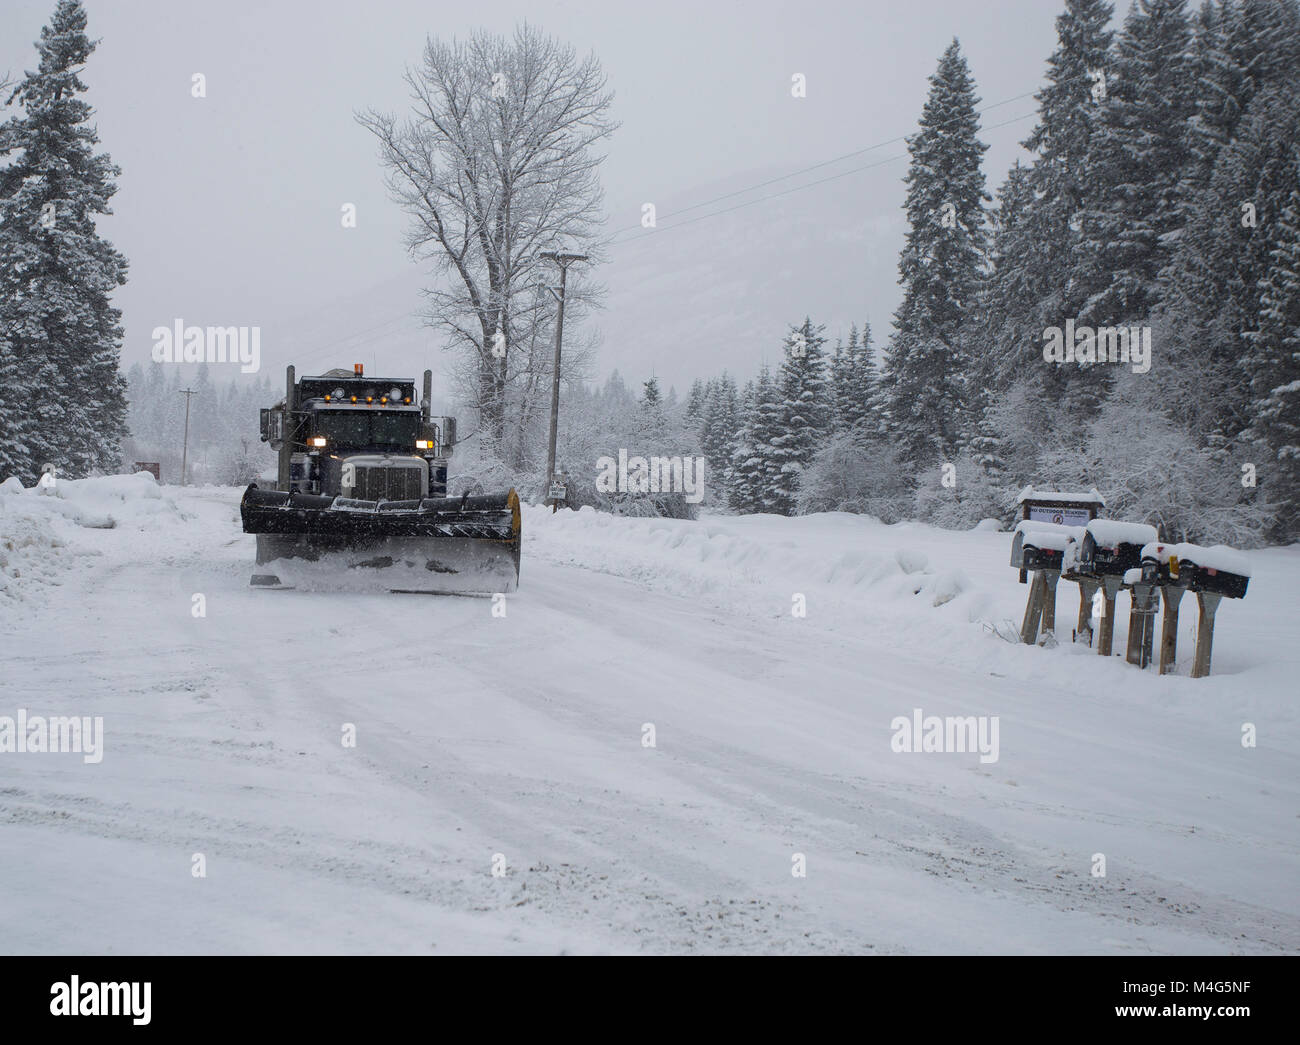 Snow event. Snow storm. A tandem axle Peterbuilt snow plow truck plowing the snow and sanding the road on the South Fork of Bull River Road, near the intersection of Highway 56, Bull Lake Road, in Sanders County, Montana. The road is located in a remote section of the Cabinet Mountains, about 20 miles north of Noxon, Montana. The area is being hit with heavy snow, coming in from the west. The storm should last several days. Stock Photo